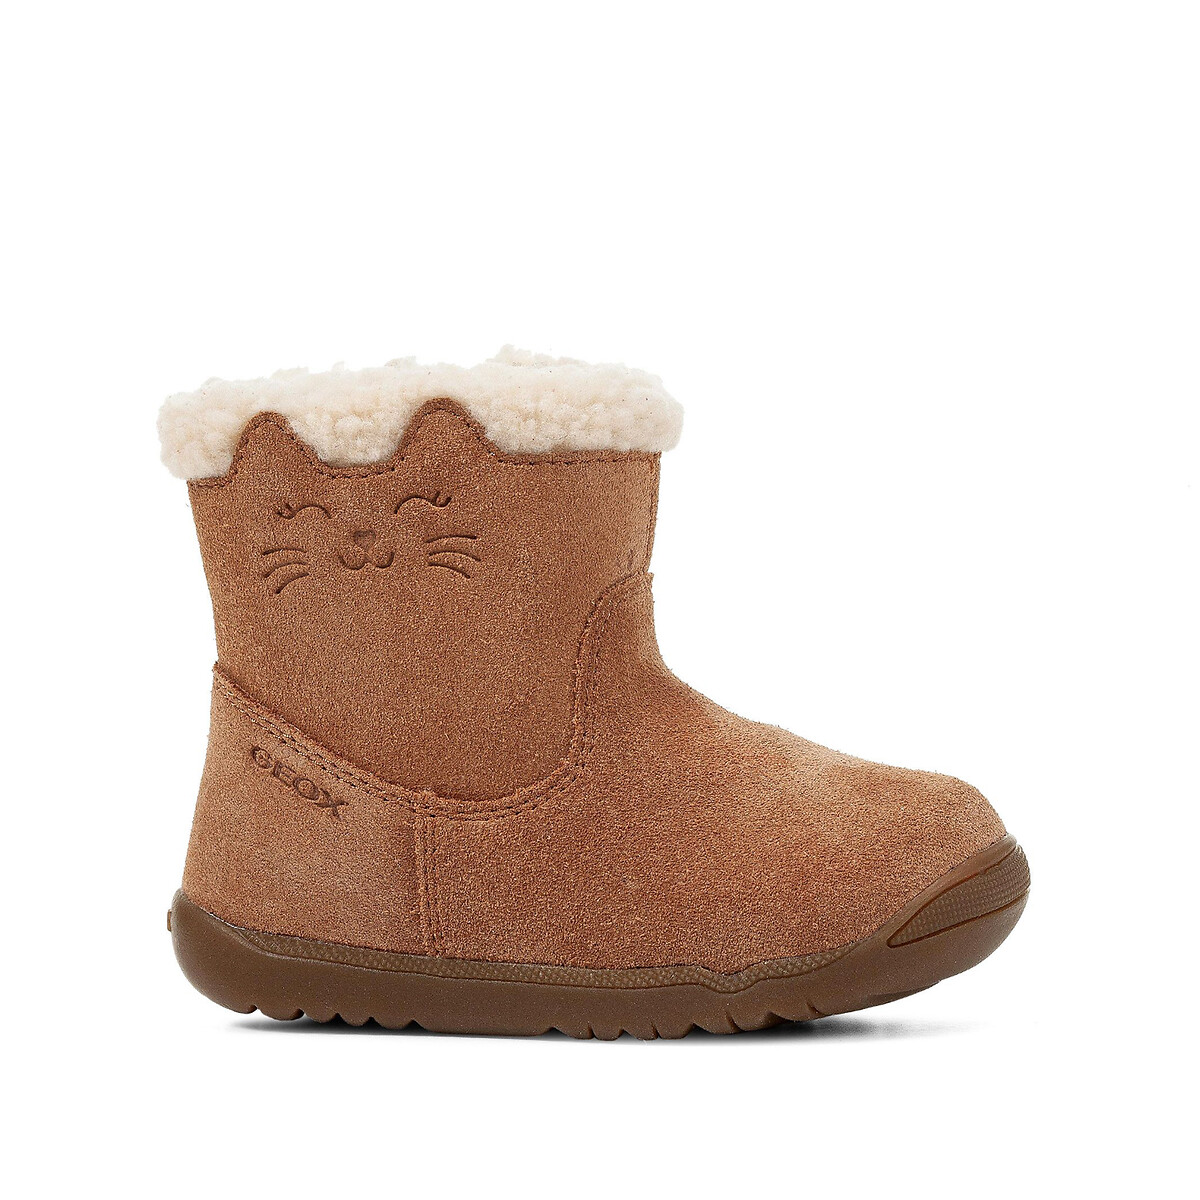 Image of Kids Macchia Calf Boots in Suede with Faux Fur